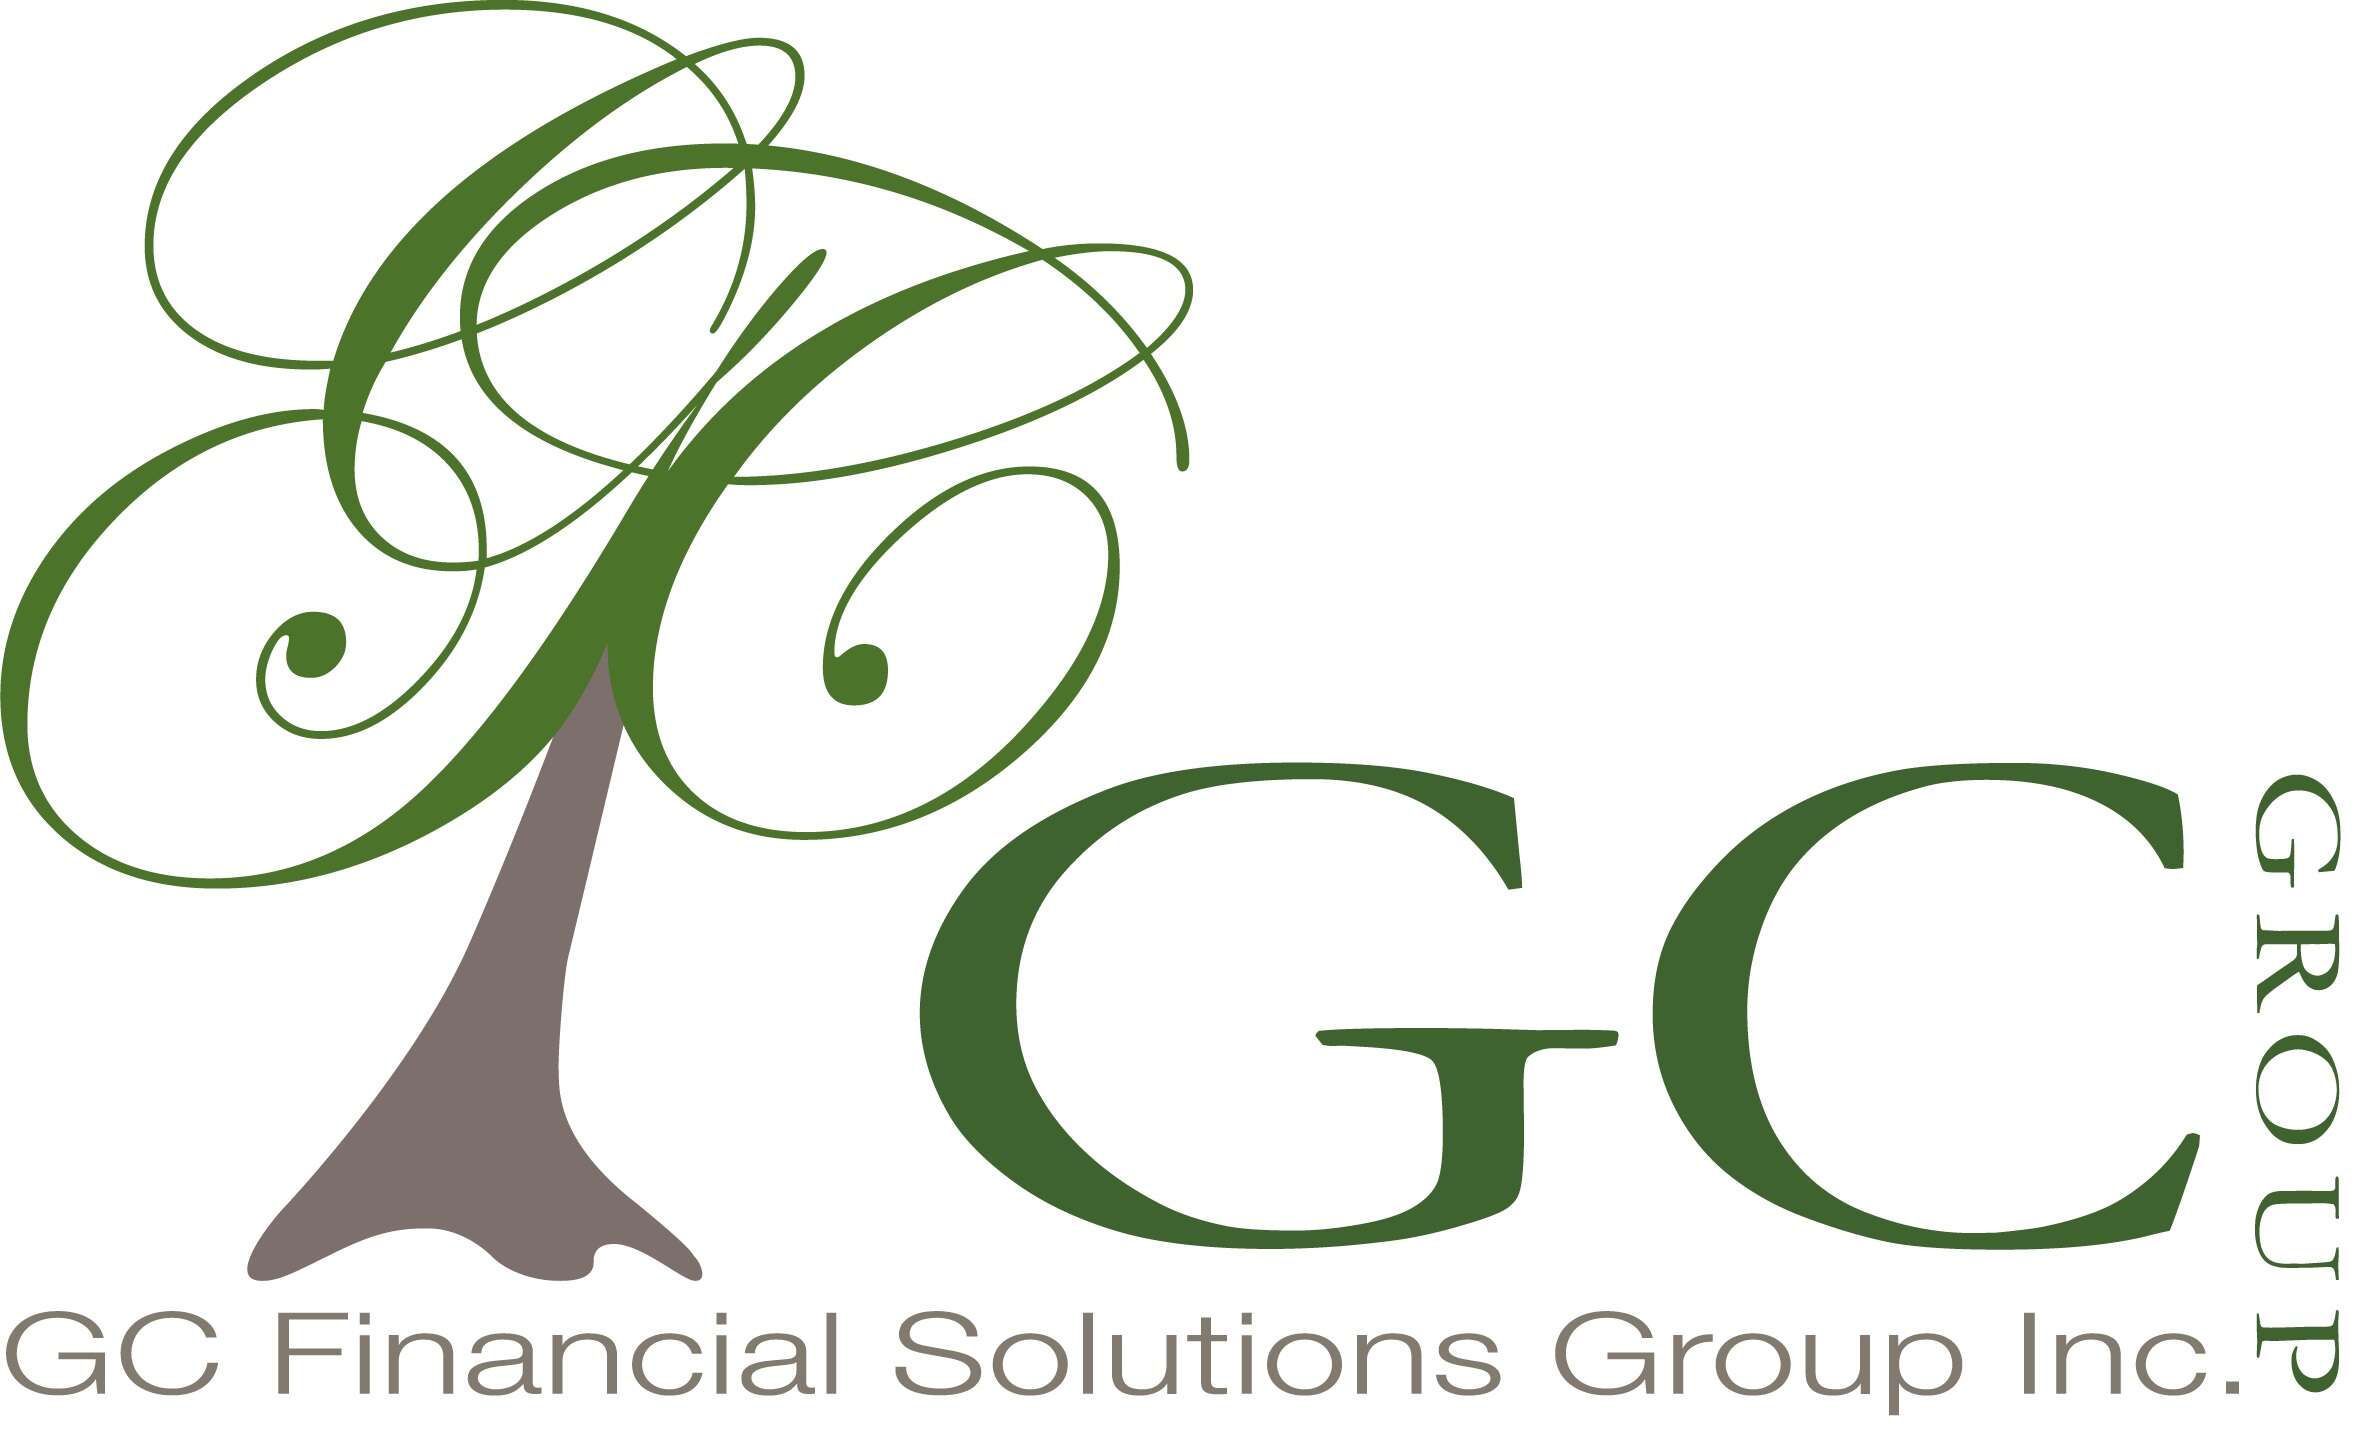 GC Financial Solutions Group Inc.